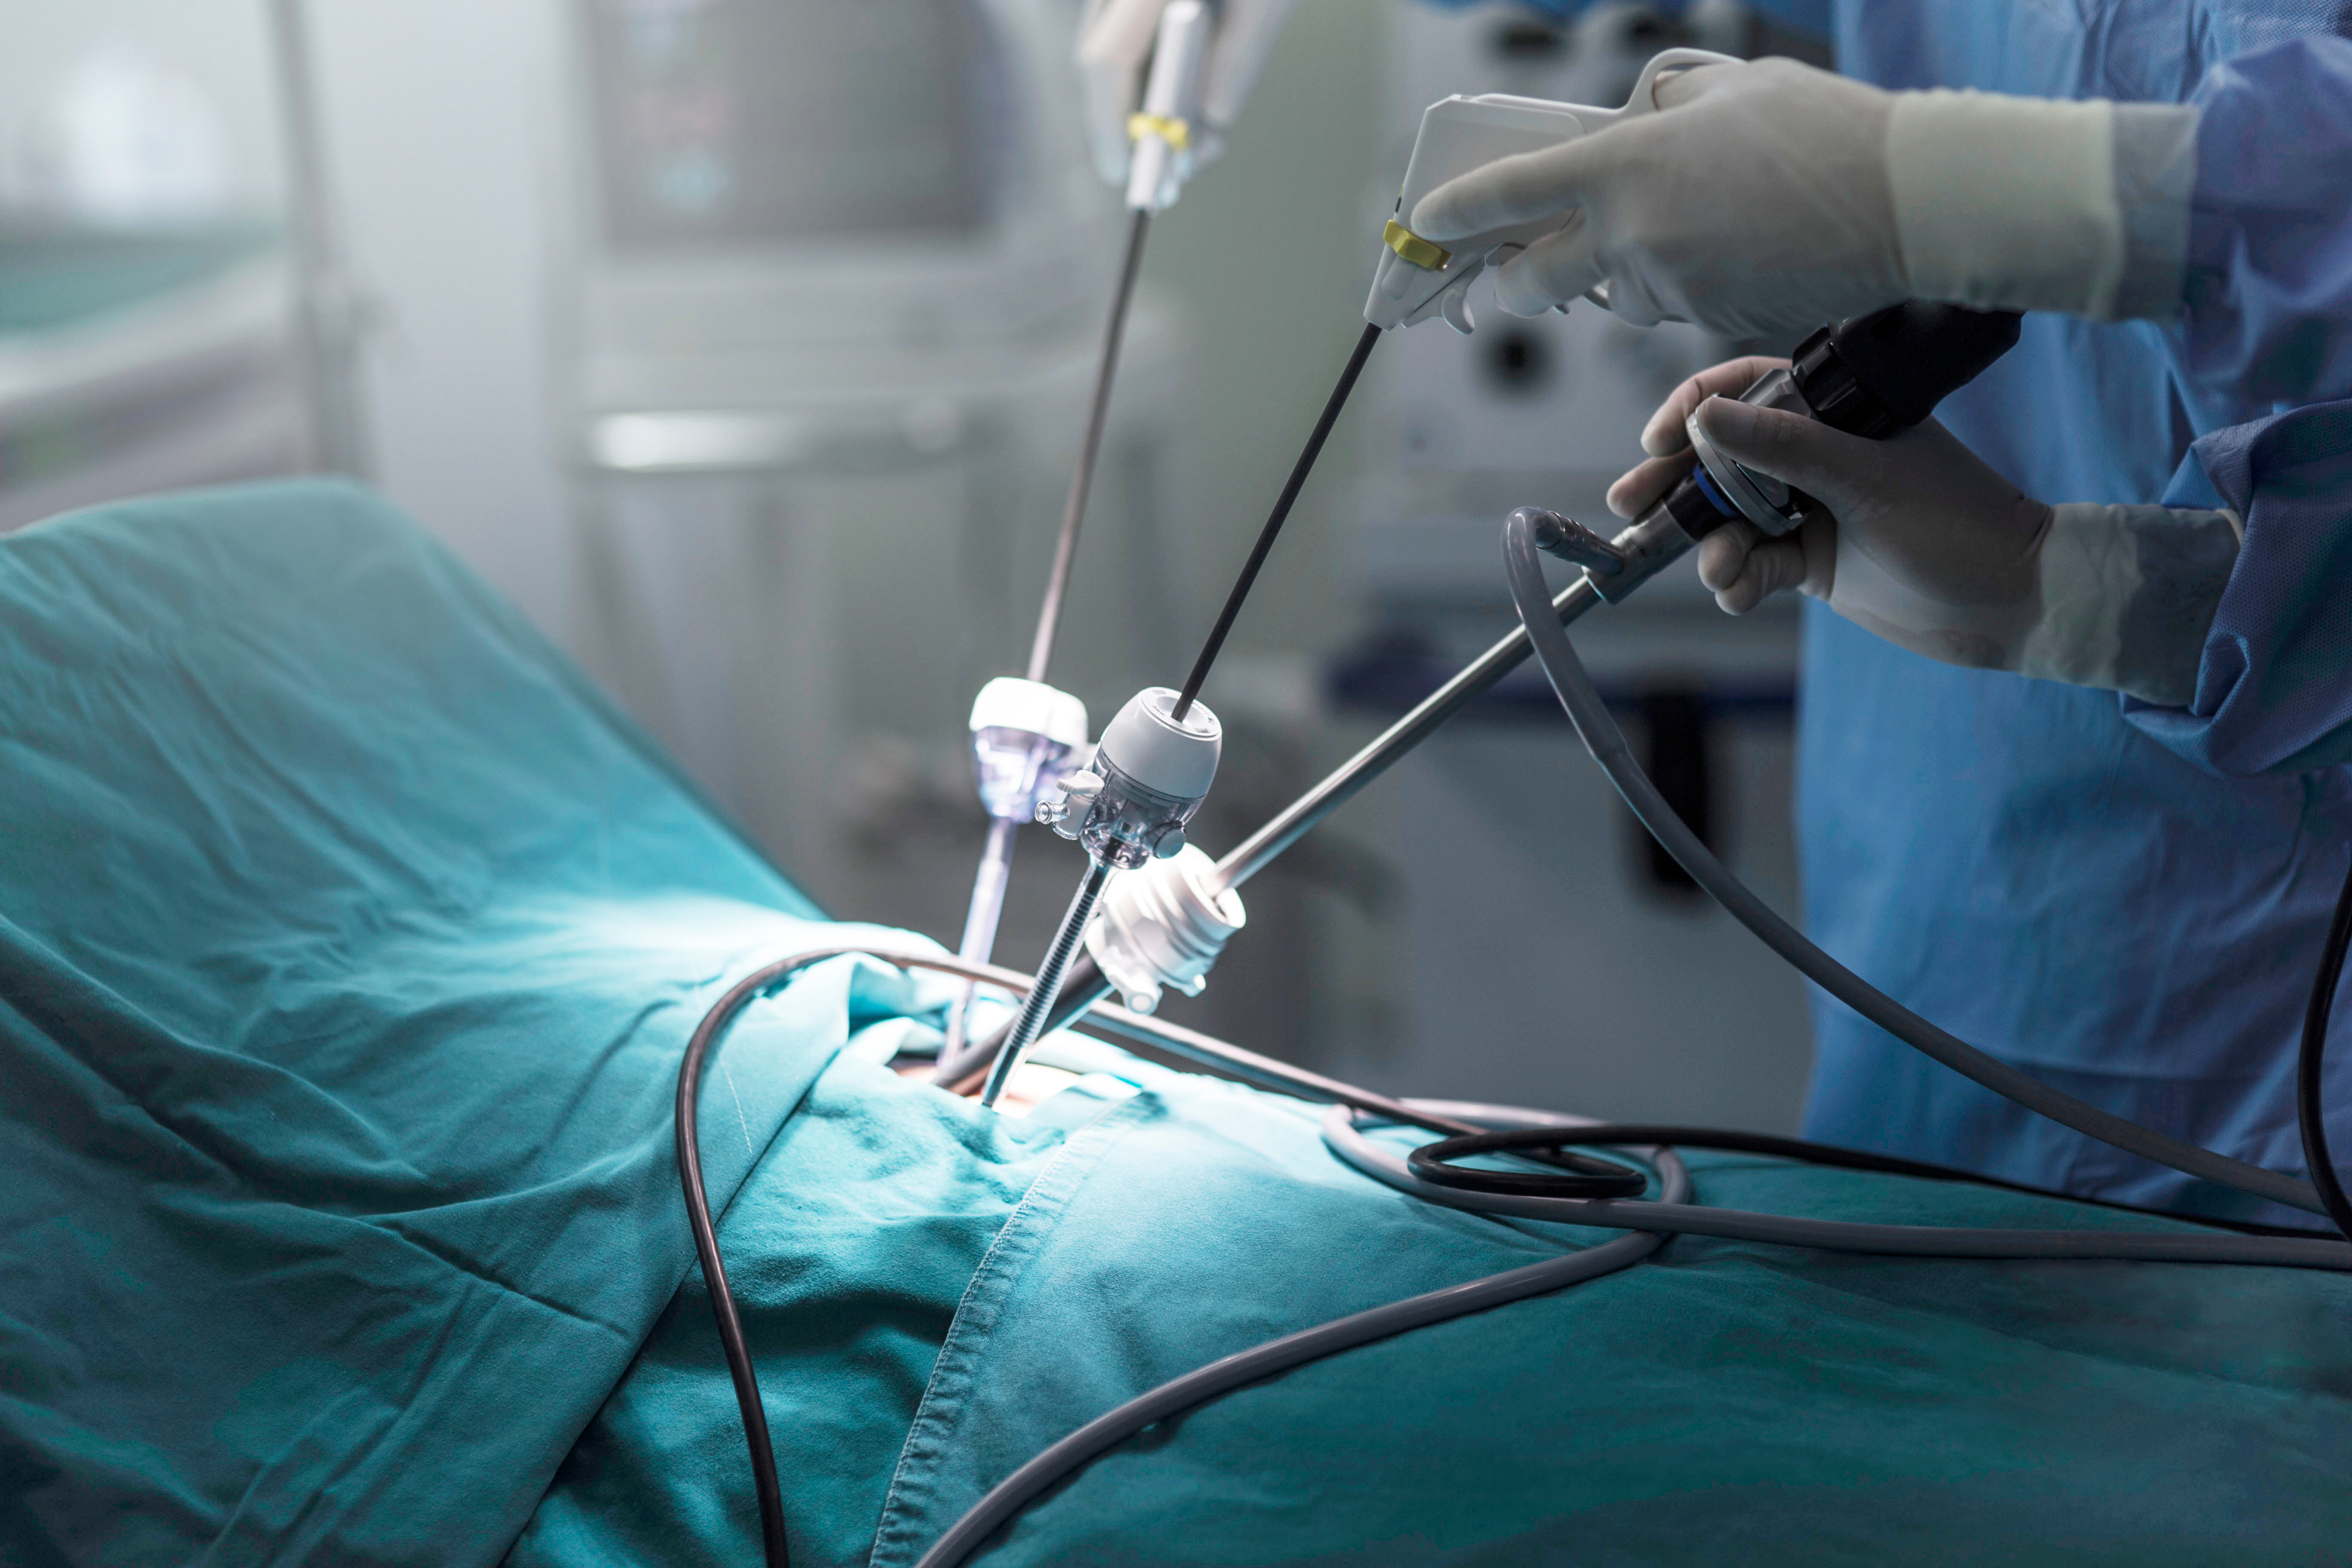 Frequently Asked Questions on Operative Technique of Laparoscopic